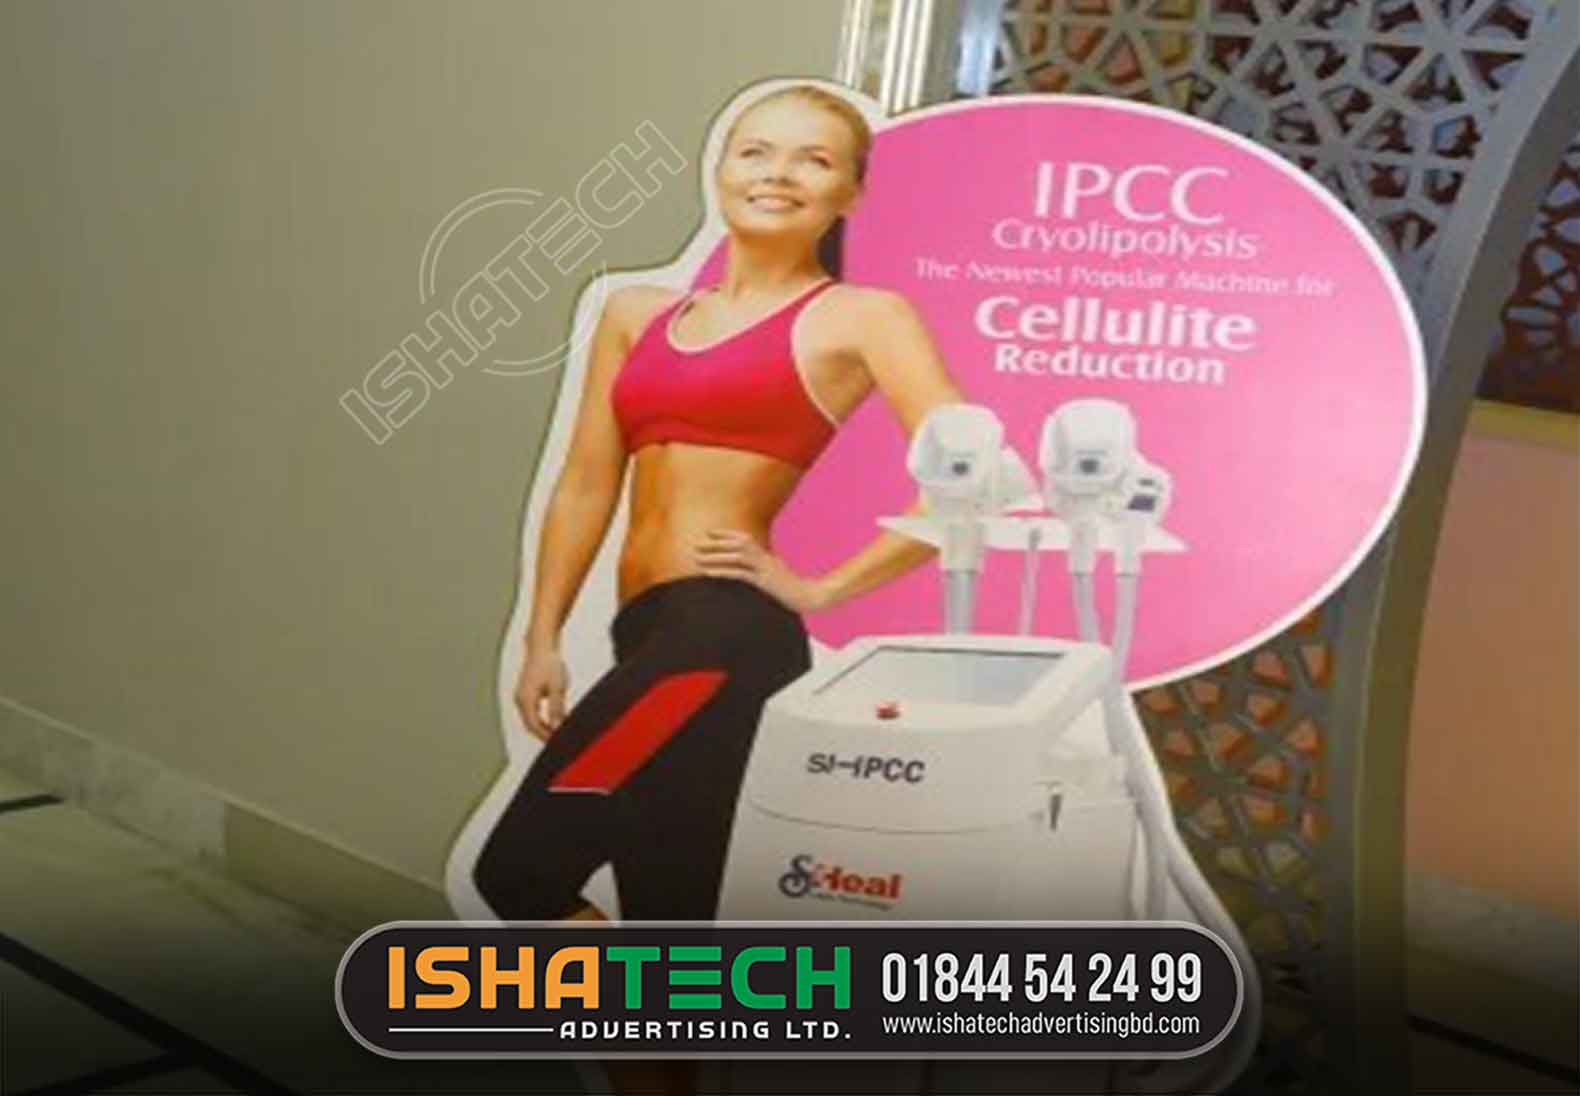 Cardboard Cutout Board Stand, Size: 5*3 Feet Create and design by ishatech advertising ltd